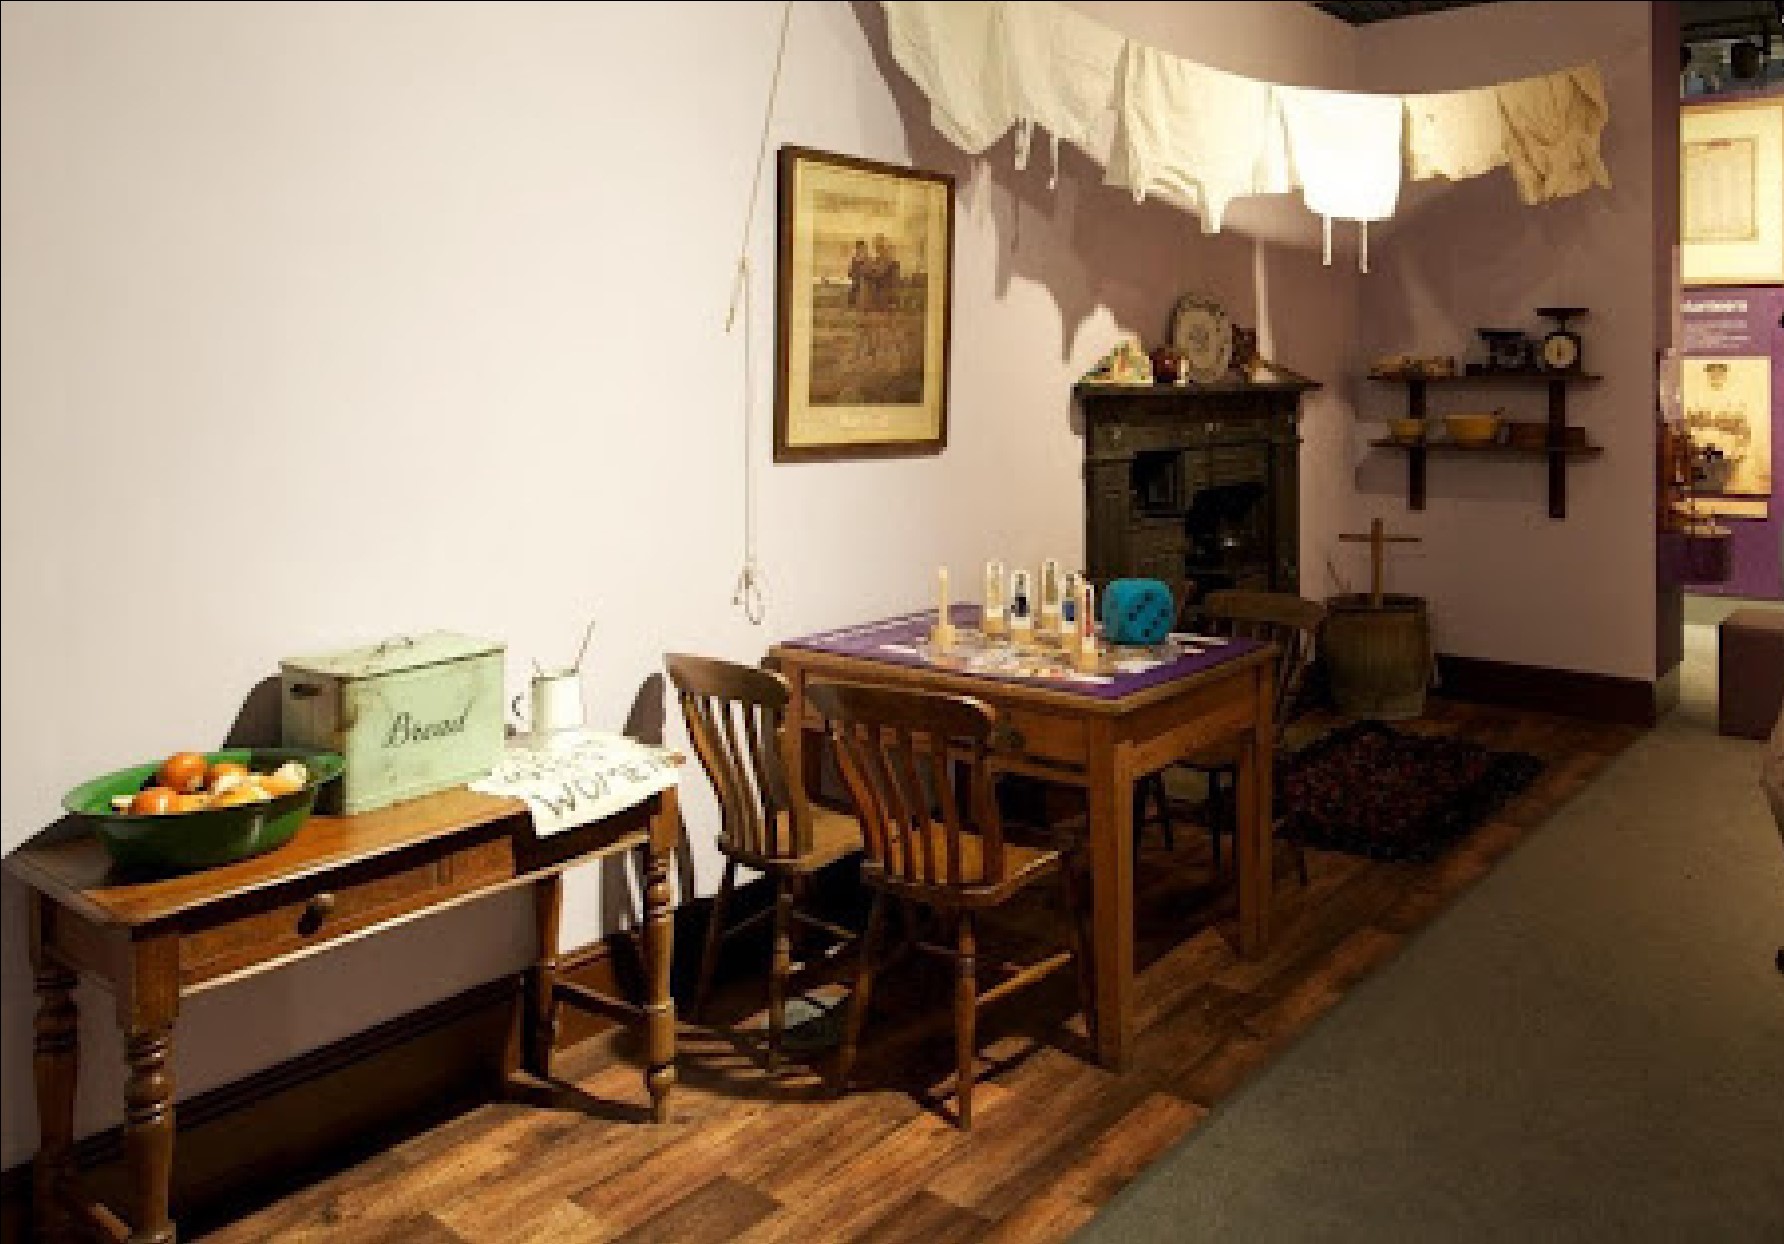 Suffragette Hannah Mitchell's kitchen in Voters section in Main Gallery One at People's History Museum.